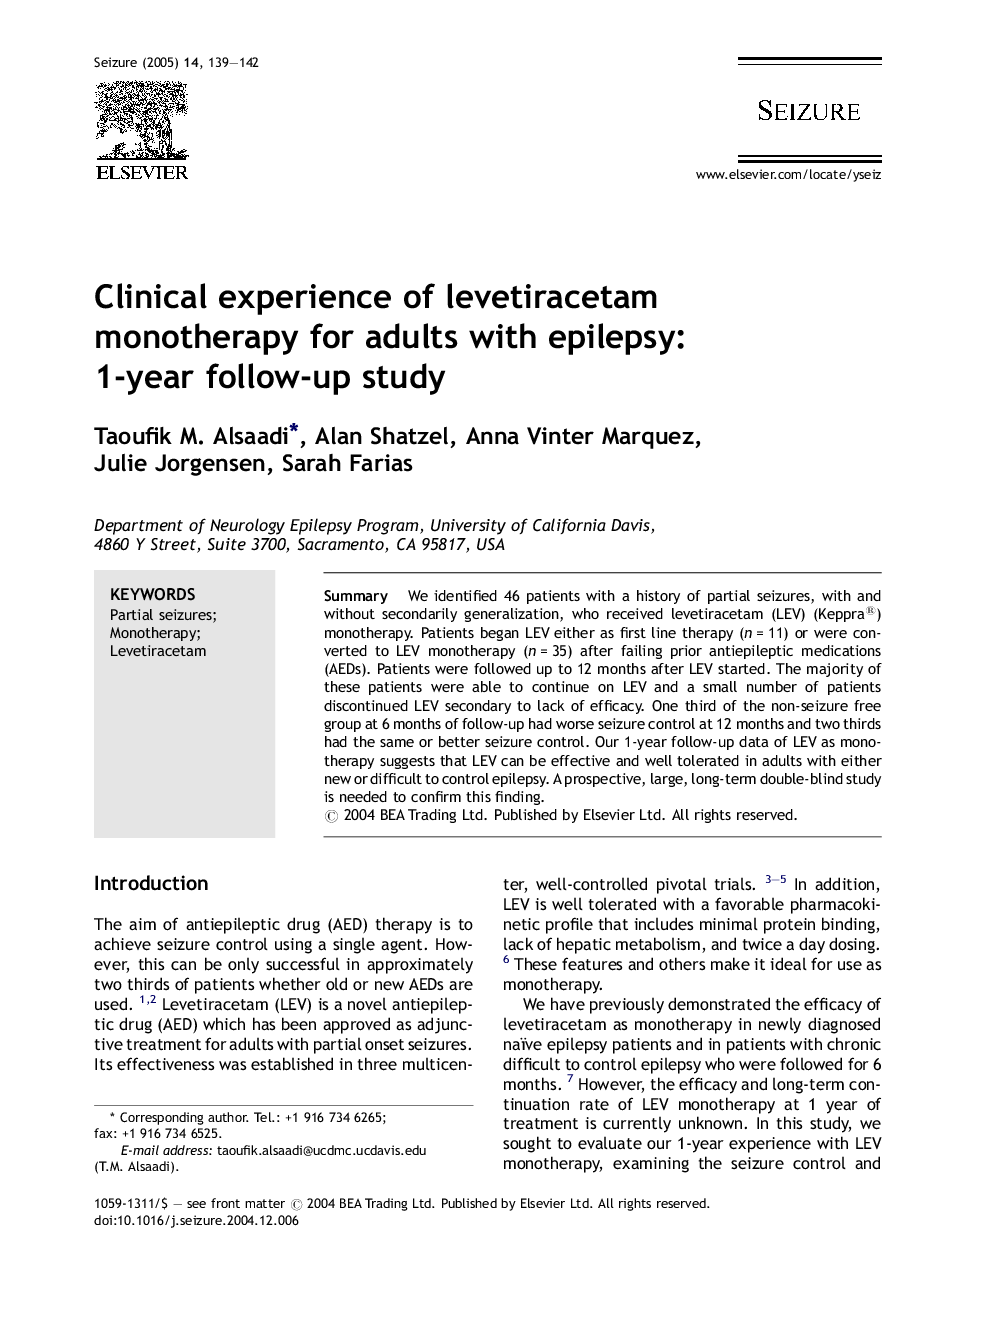 Clinical experience of levetiracetam monotherapy for adults with epilepsy: 1-year follow-up study